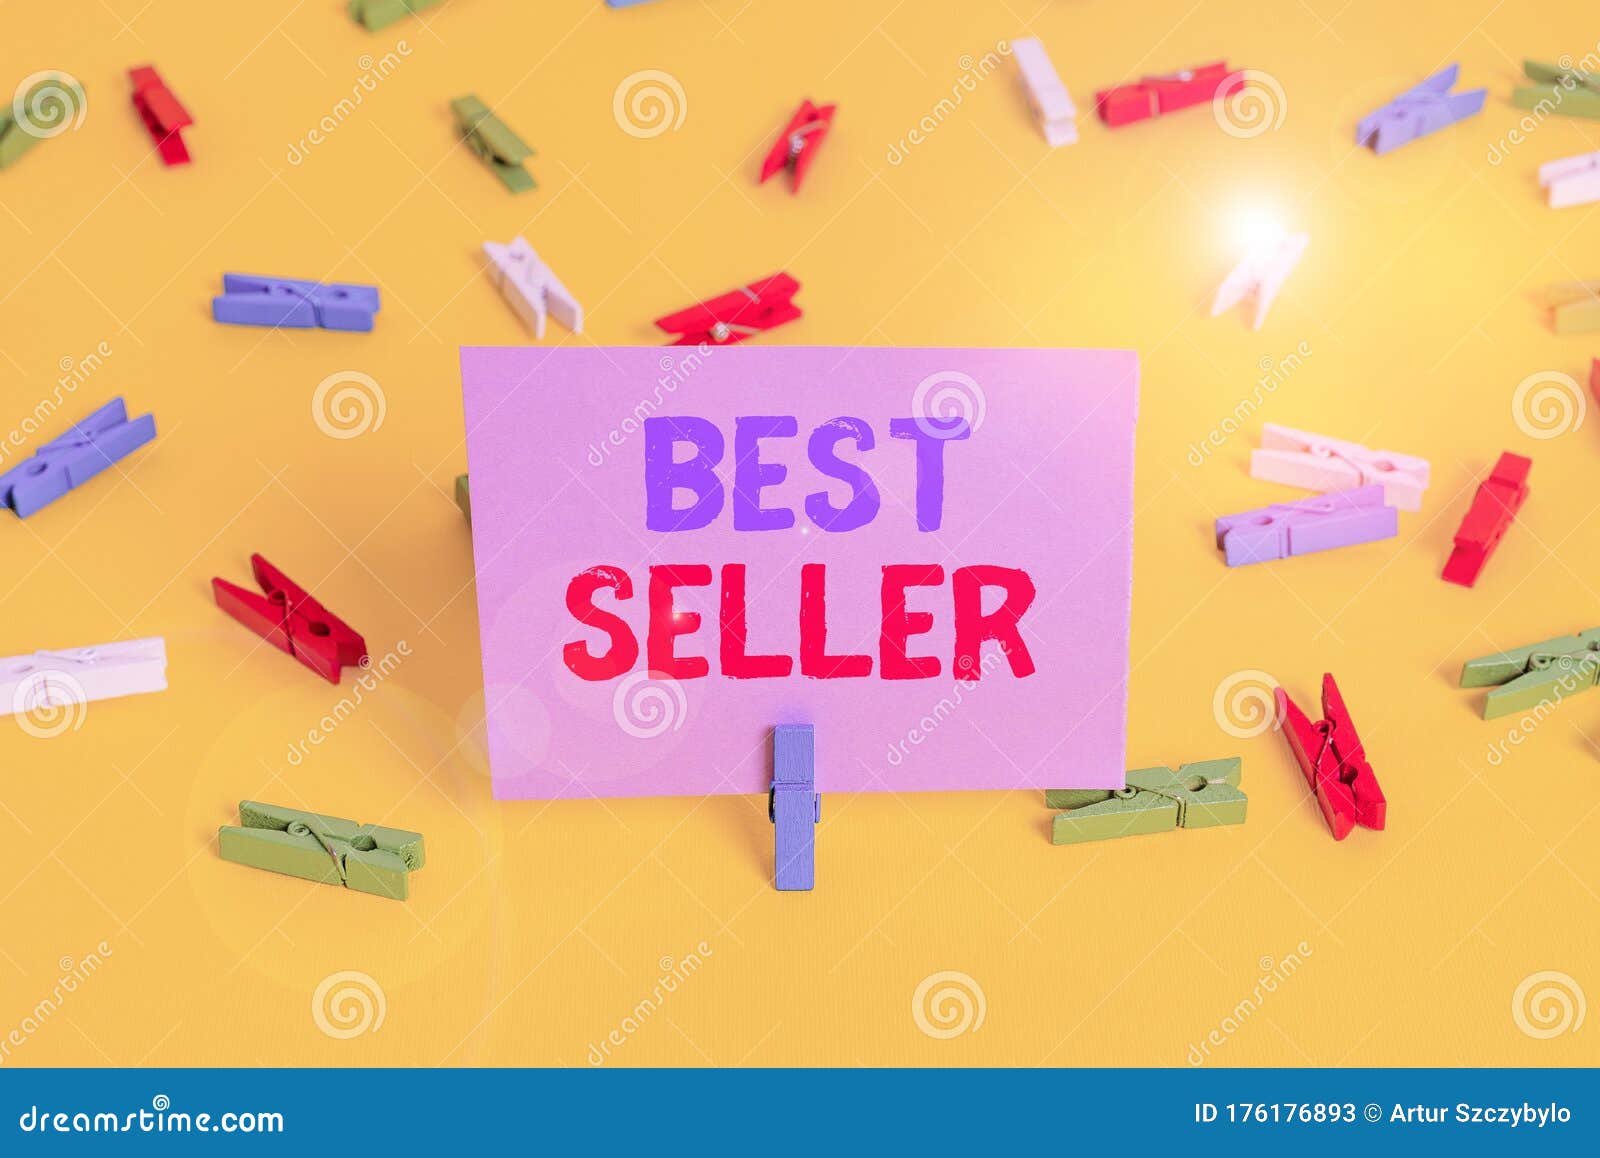 https://thumbs.dreamstime.com/z/handwriting-text-writing-best-seller-concept-meaning-new-book-other-product-has-sold-great-number-copies-colored-176176893.jpg